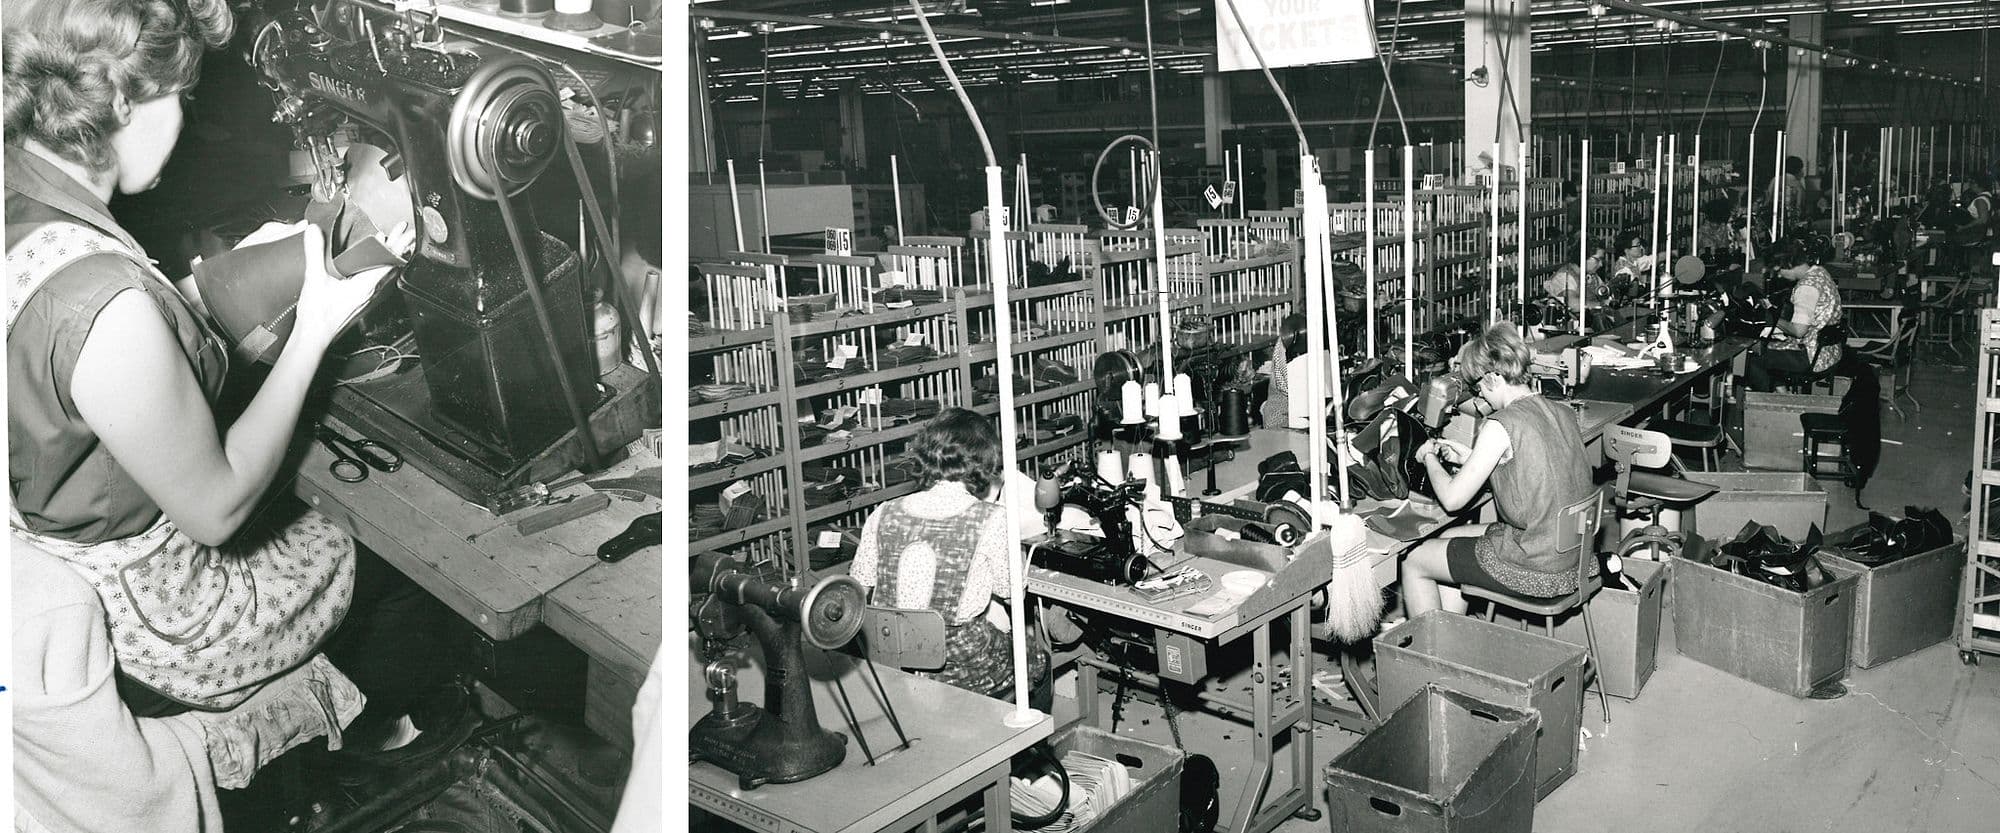 Red wings factory in early 1900s